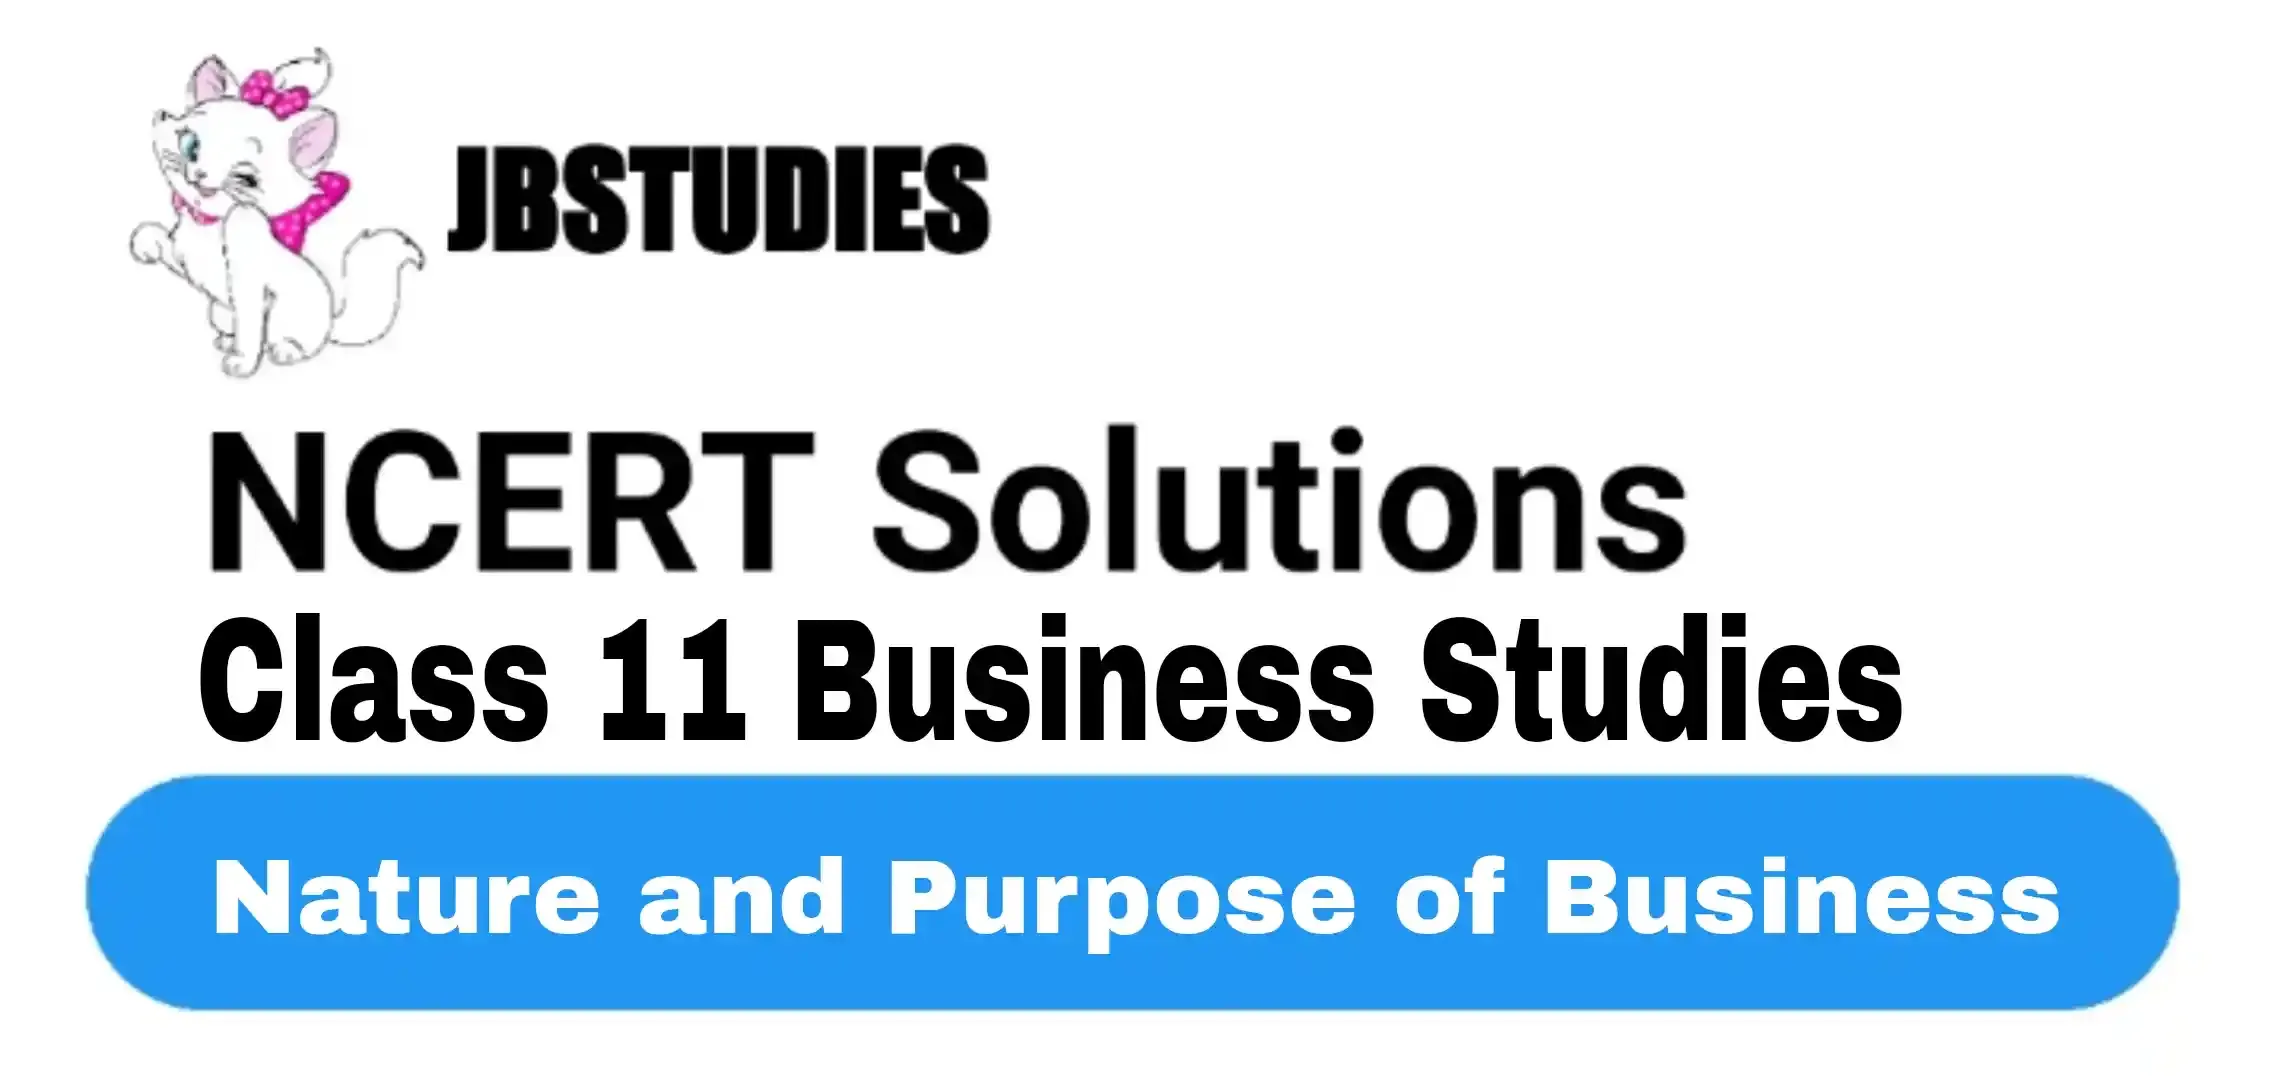 Solutions Class 11 Business Studies Chapter -1 (Nature and Purpose of Business)